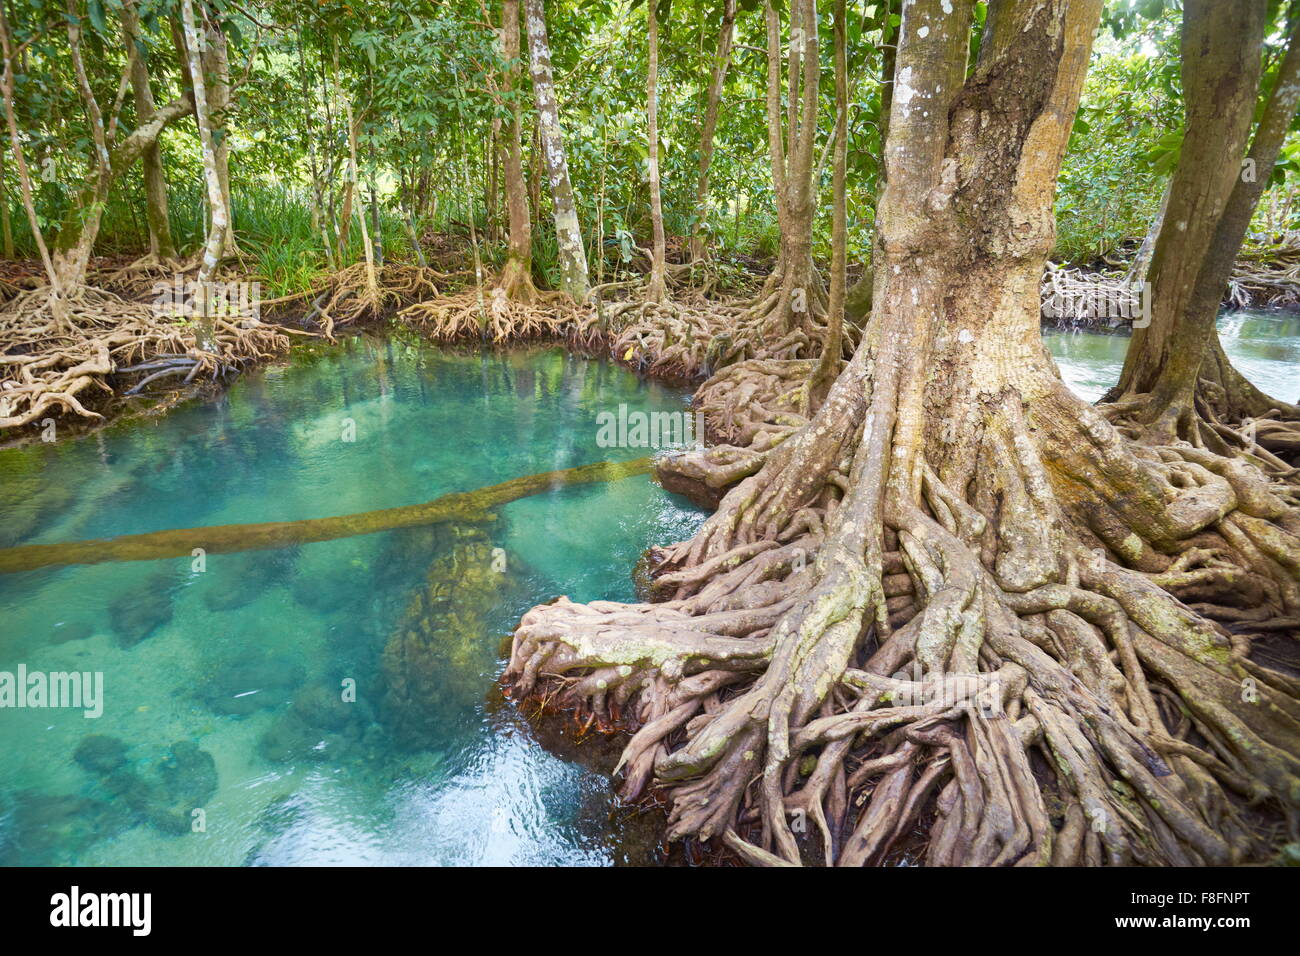 Thailand - mangrove forest in Tha Pom Khlong Song Nam National Park Stock Photo